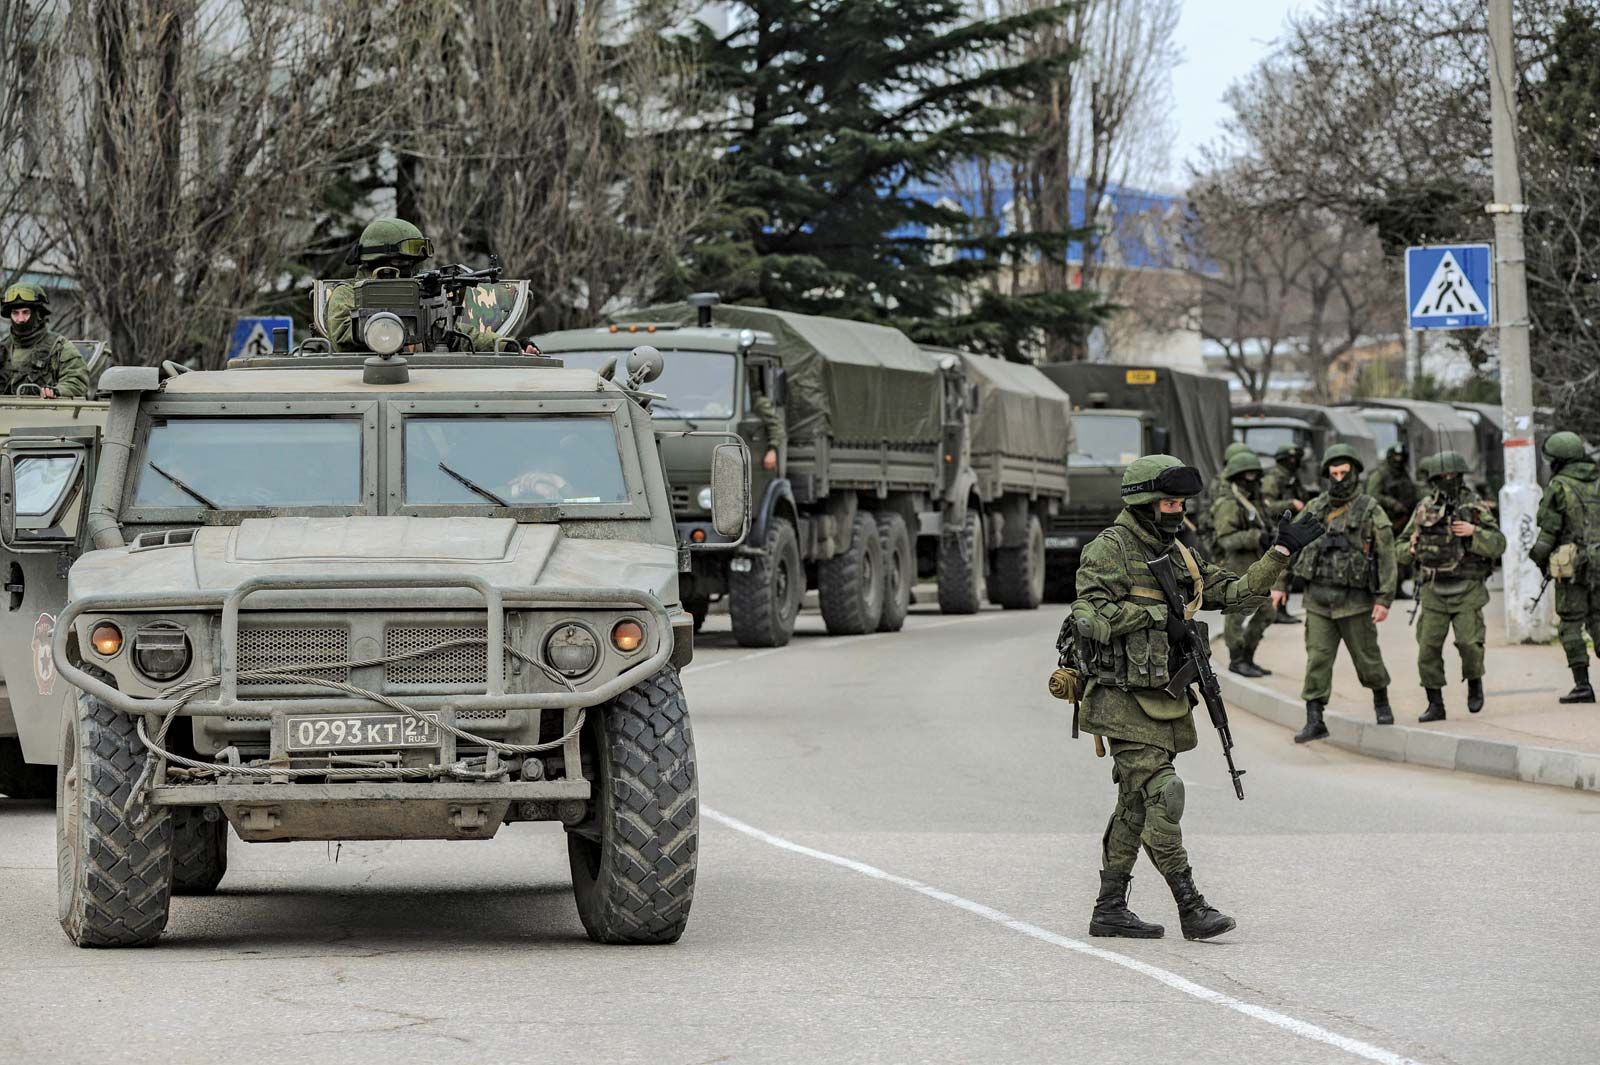 Russian Military Presence in Crimea: Tensions on the Streets